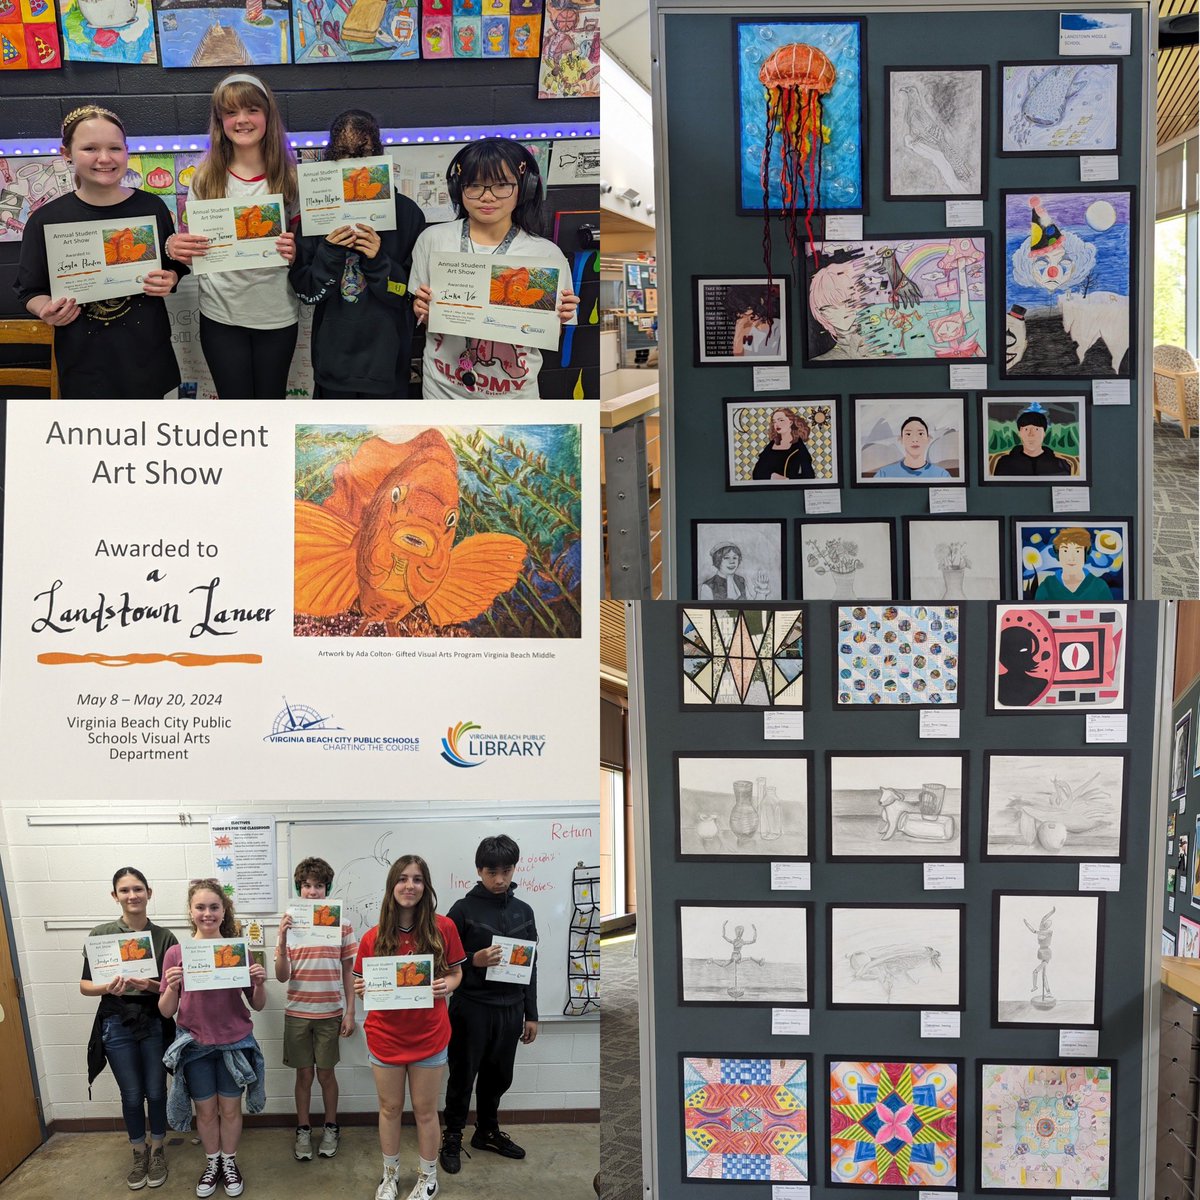 Amazing Landstown Middle School Artist's work is on display at the VBCPS Annual Art Show. Check out the work at the #TCC #CityofVB Joint-Use Library from May 8-20. #ArtEveryday @Landstownms @vbschools